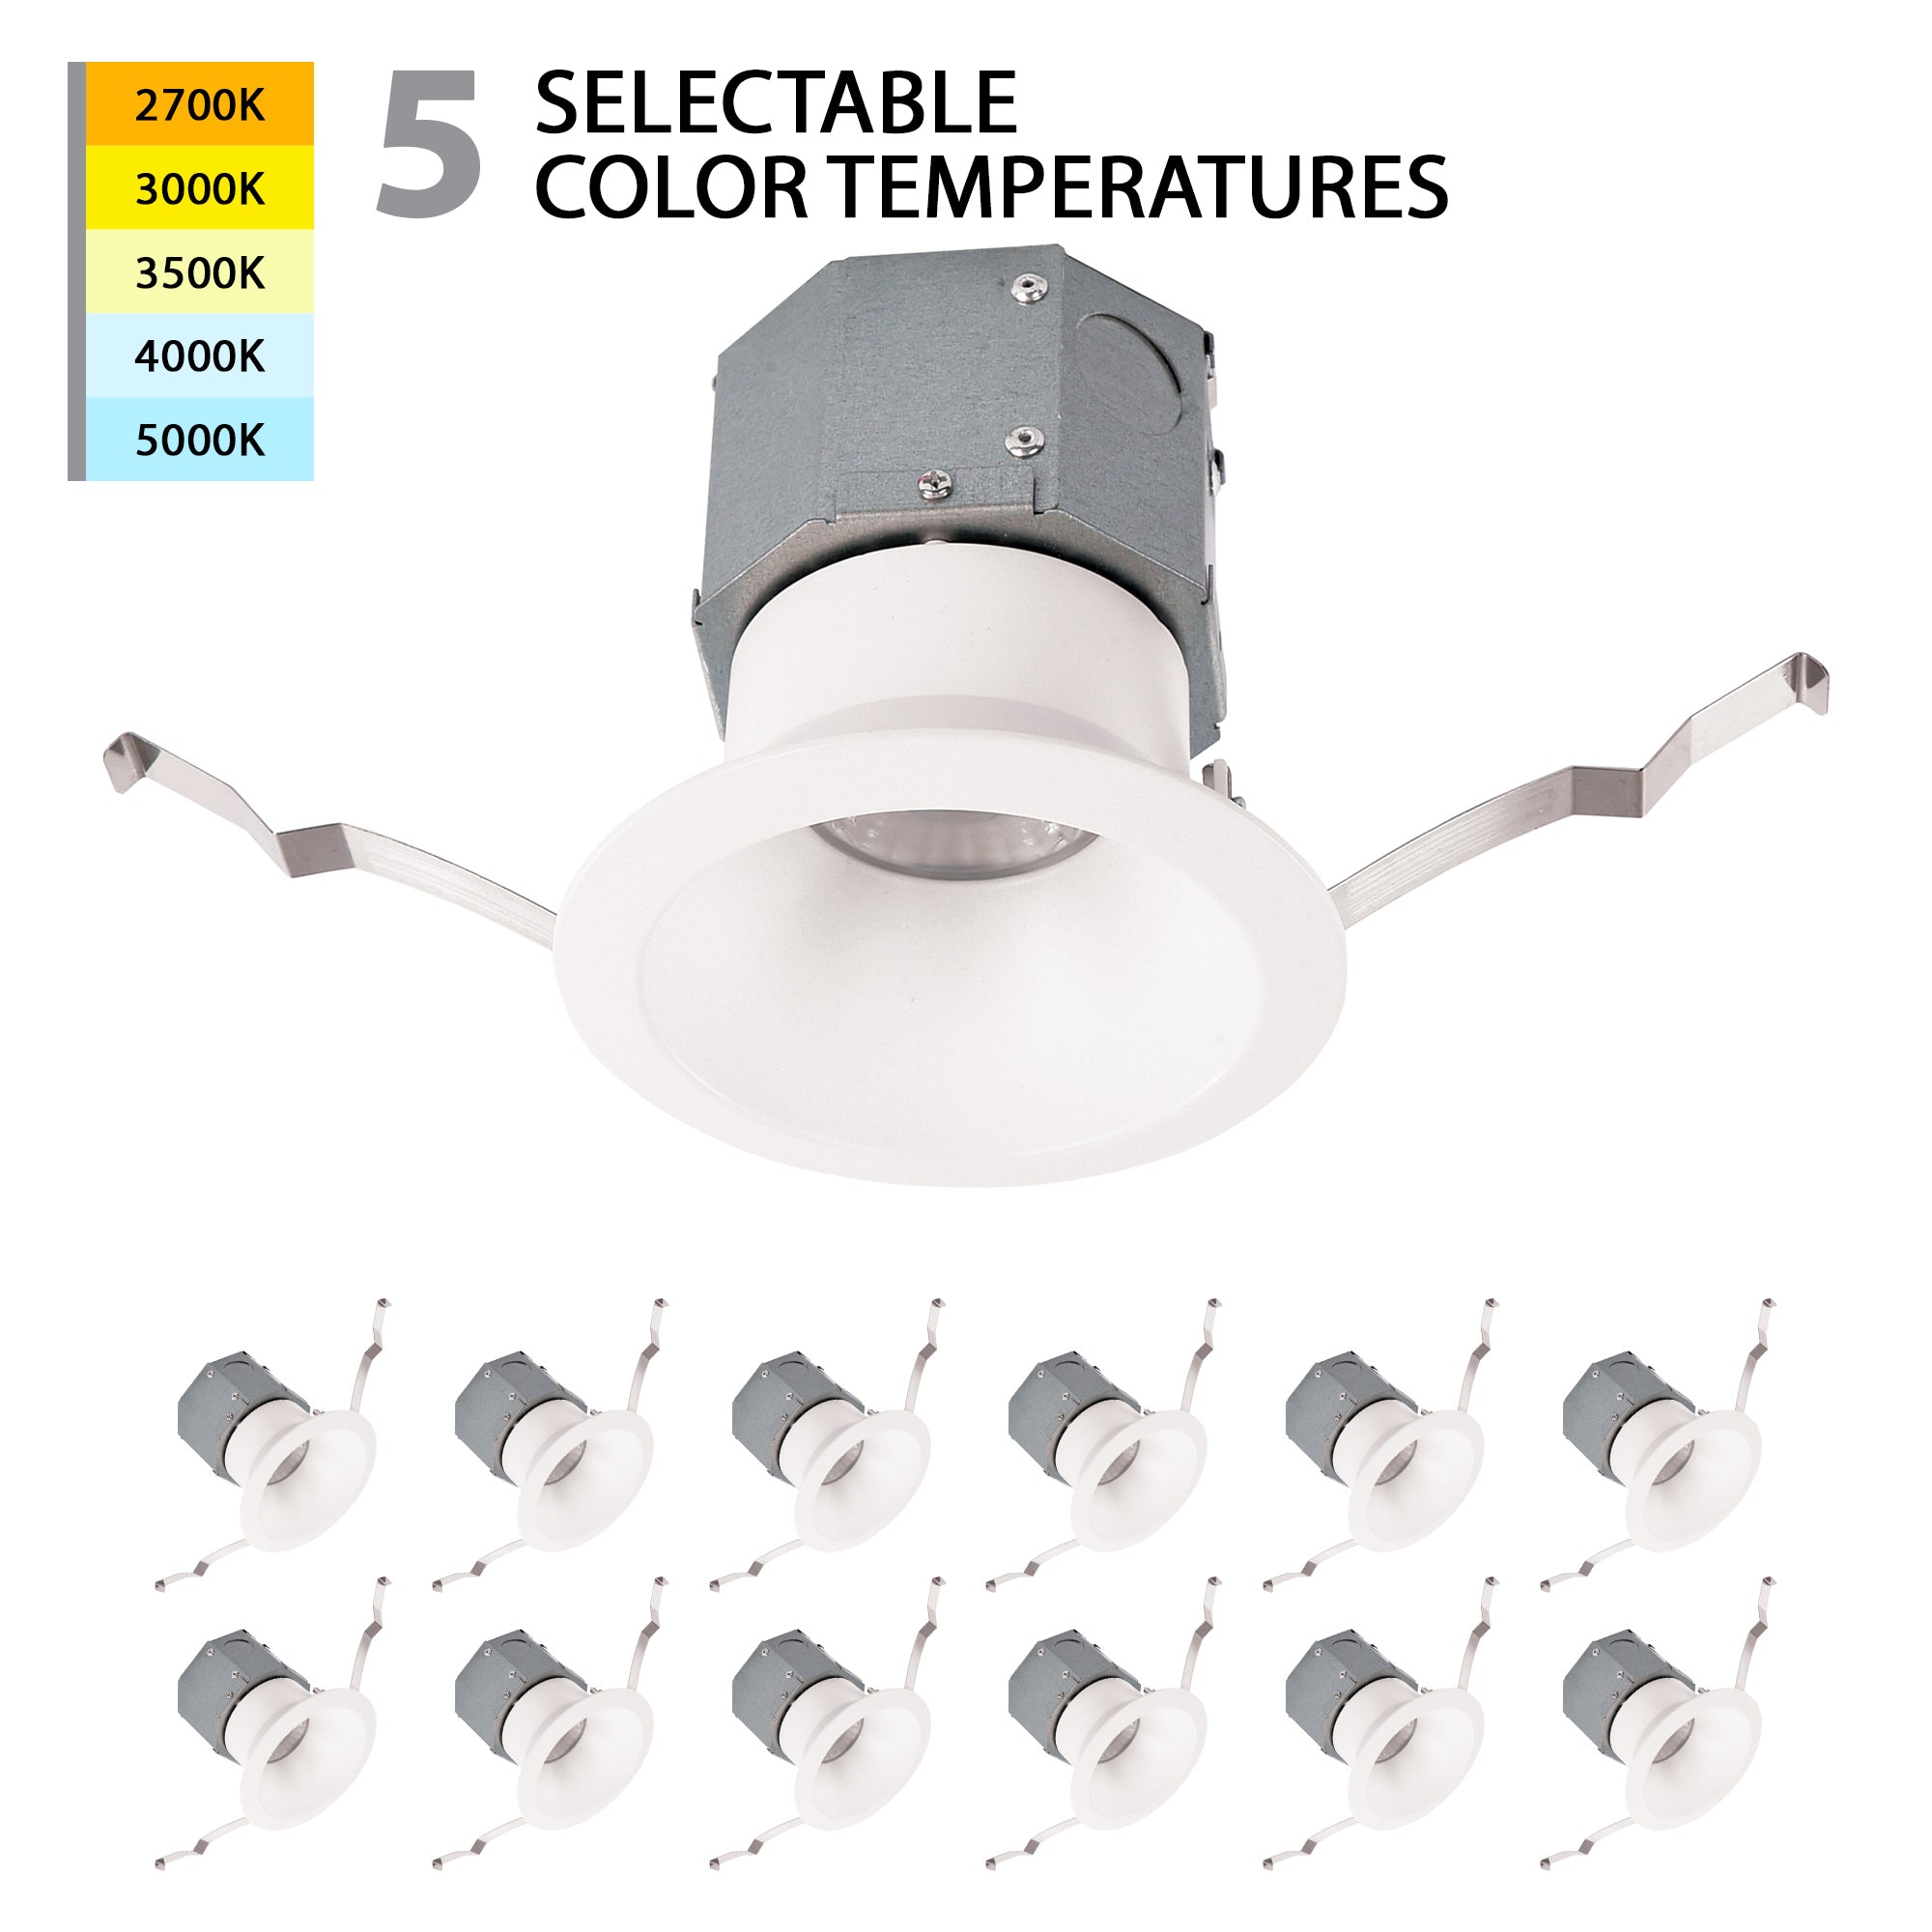 Pop-in 4" LED Round Recessed Kit 5-CCT Selectable (Pack of 12)